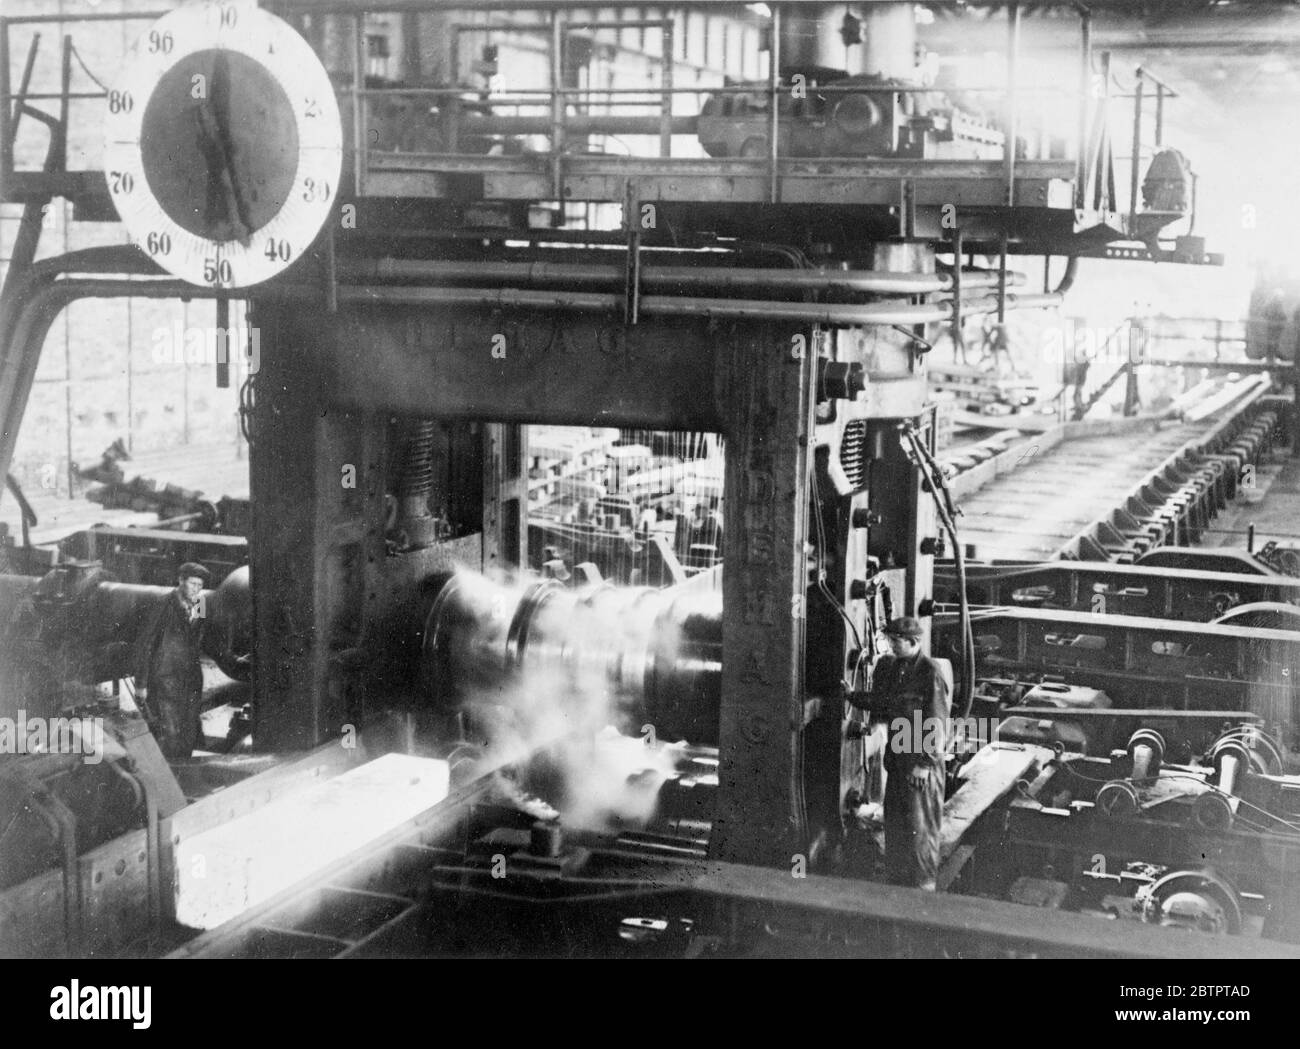 Steel mills in the USSR. Rolling ingot's at the mills in Magnitogorsk, USSR. The white hot metal is seen at left. 1930s Stock Photo